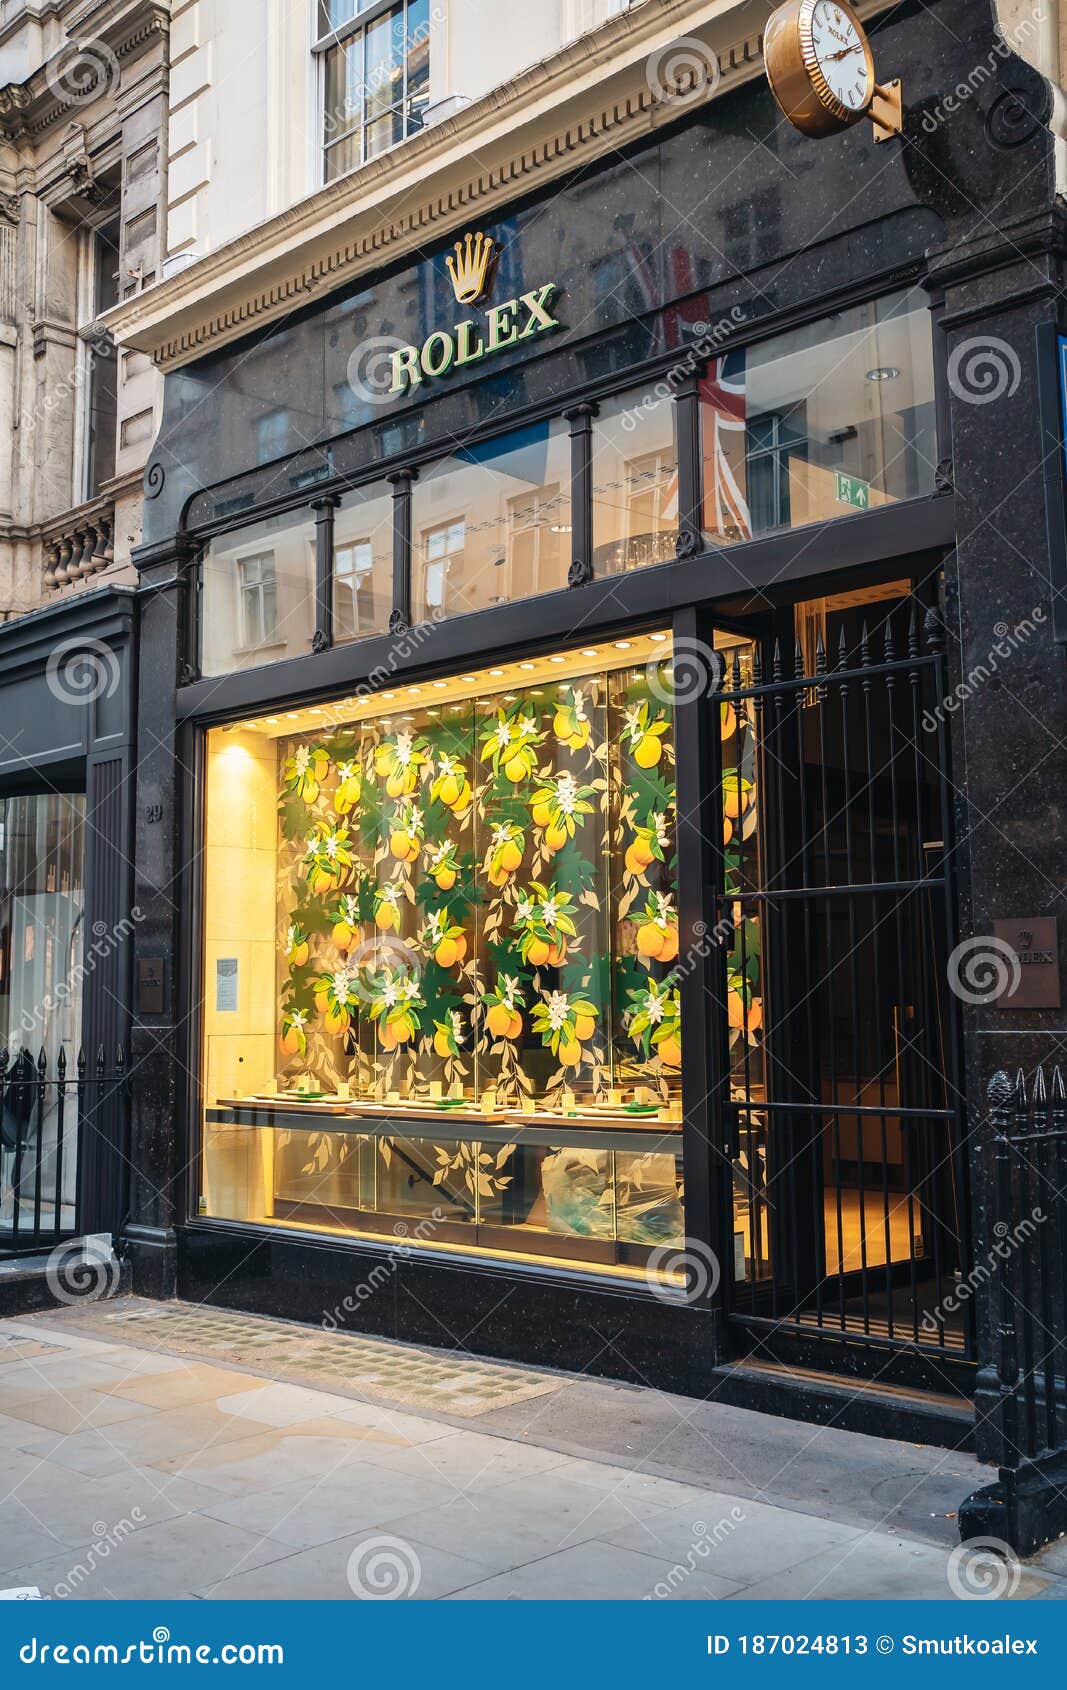 Rolex Shop in London Prepared for Looting during the of BLM Editorial Stock Photo - Image of jewelry, black: 187024813